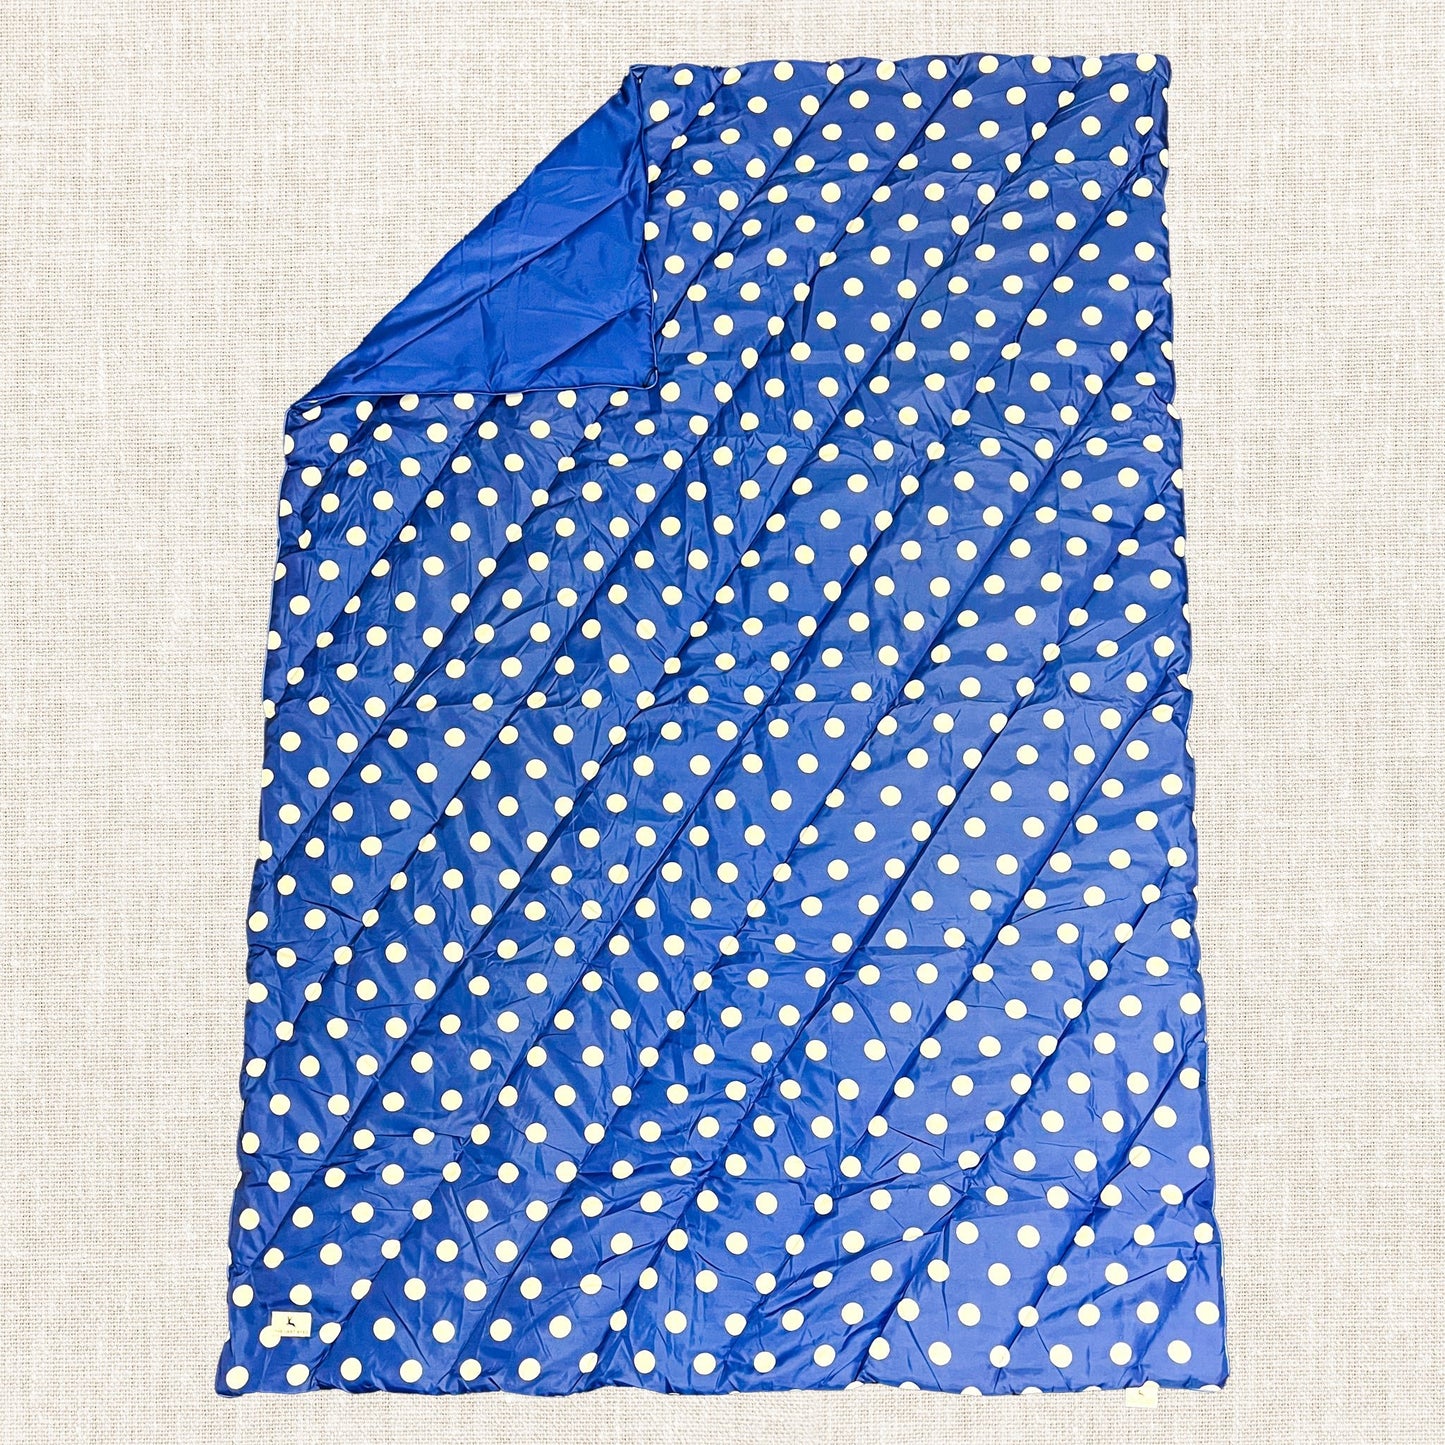 Go Blue Polka Dot - Wearable Outdoor Puffy Blanket | The Last Stag